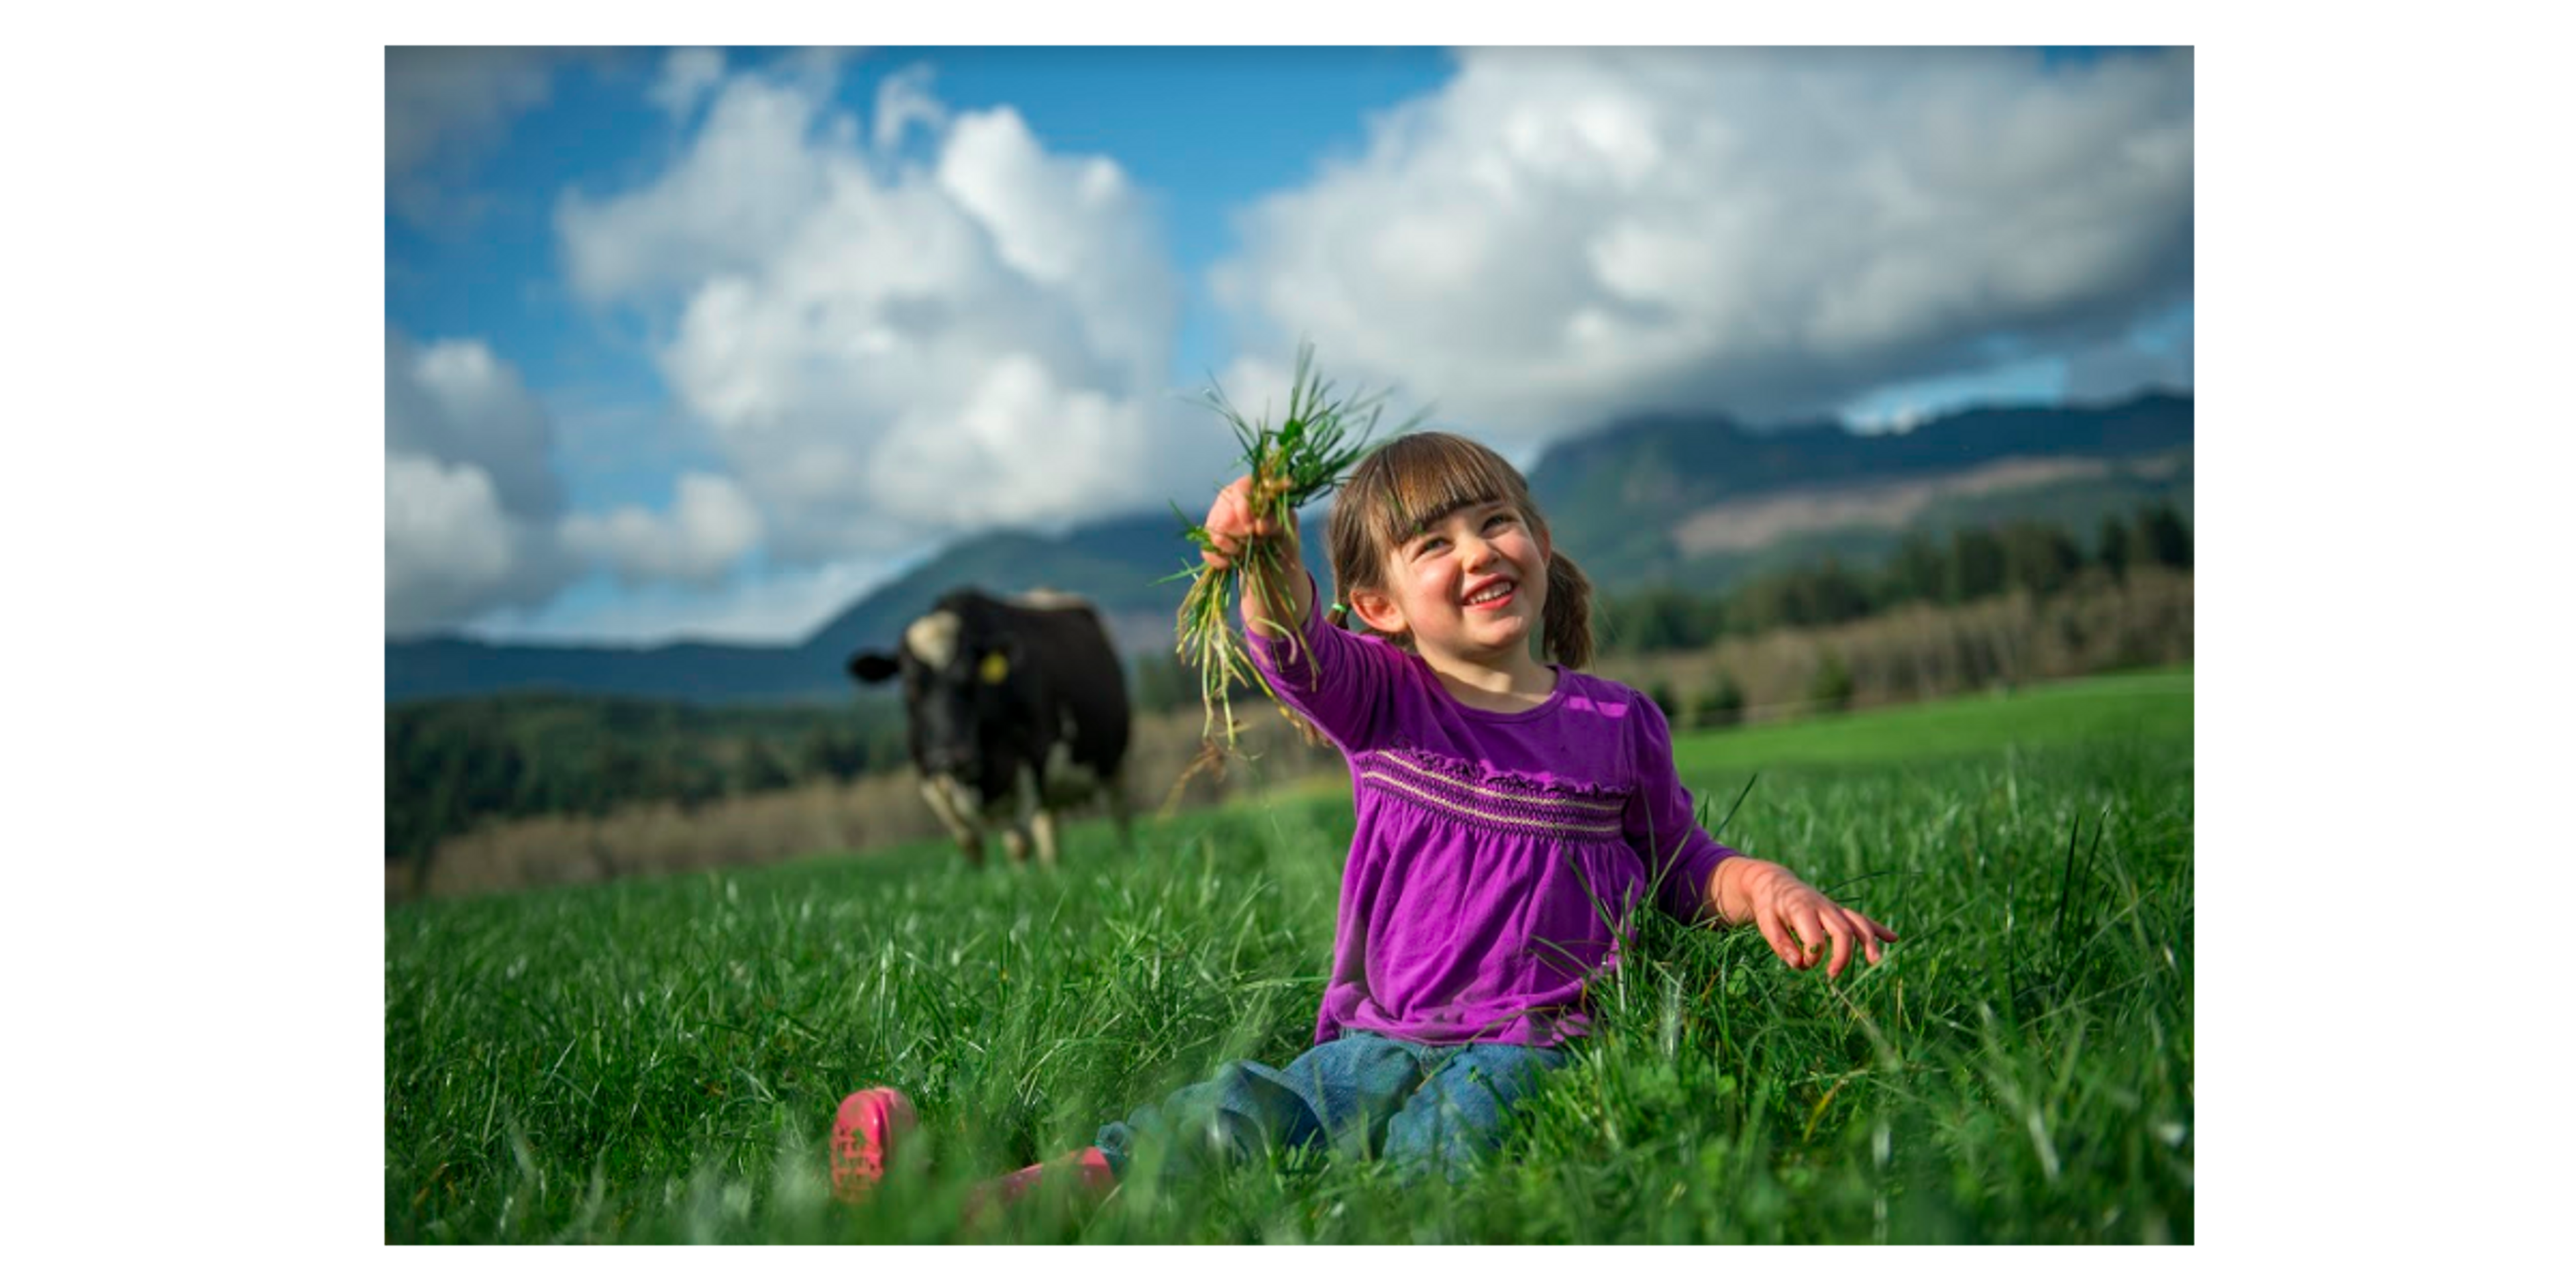 Girl holds up handful of grass, as suspicious cow creeps in the background.